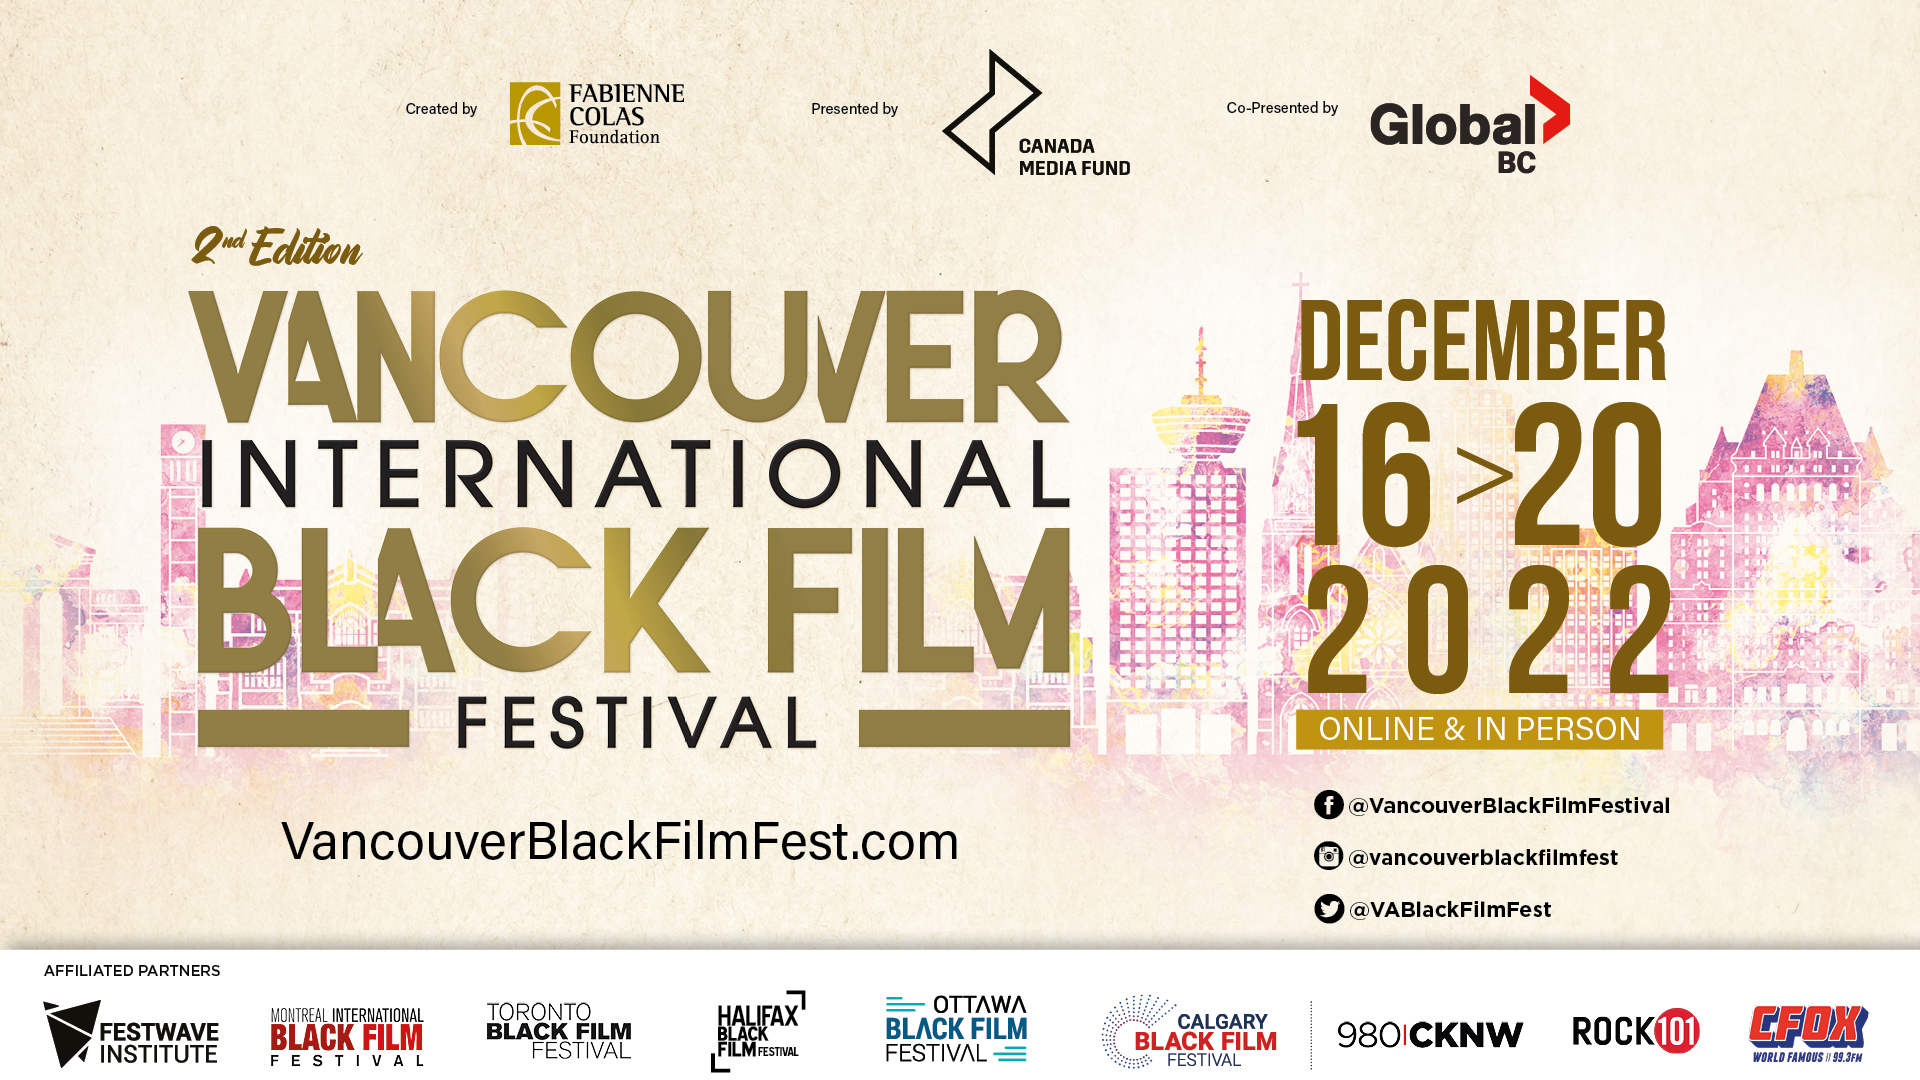 2ND EDITION OF THE VANCOUVER INTERNATIONAL BLACK FILM FESTIVAL IS BACK ON DECEMBER 16 – 20, 2022